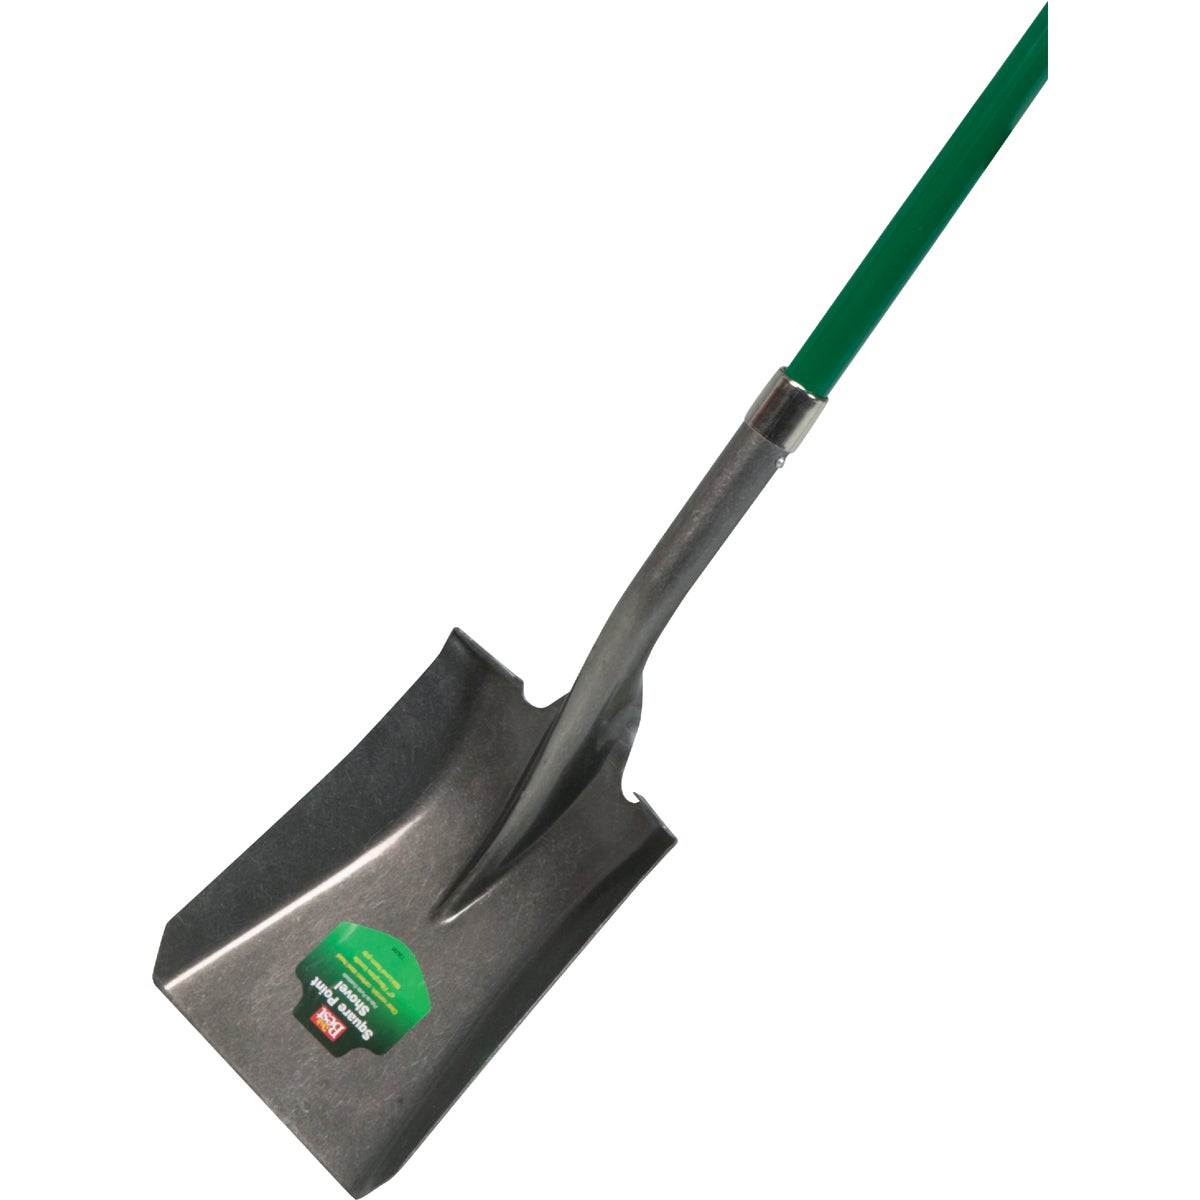 Item 736295, Square point shovel with 16-gauge, powder coated carbon steel blade with 